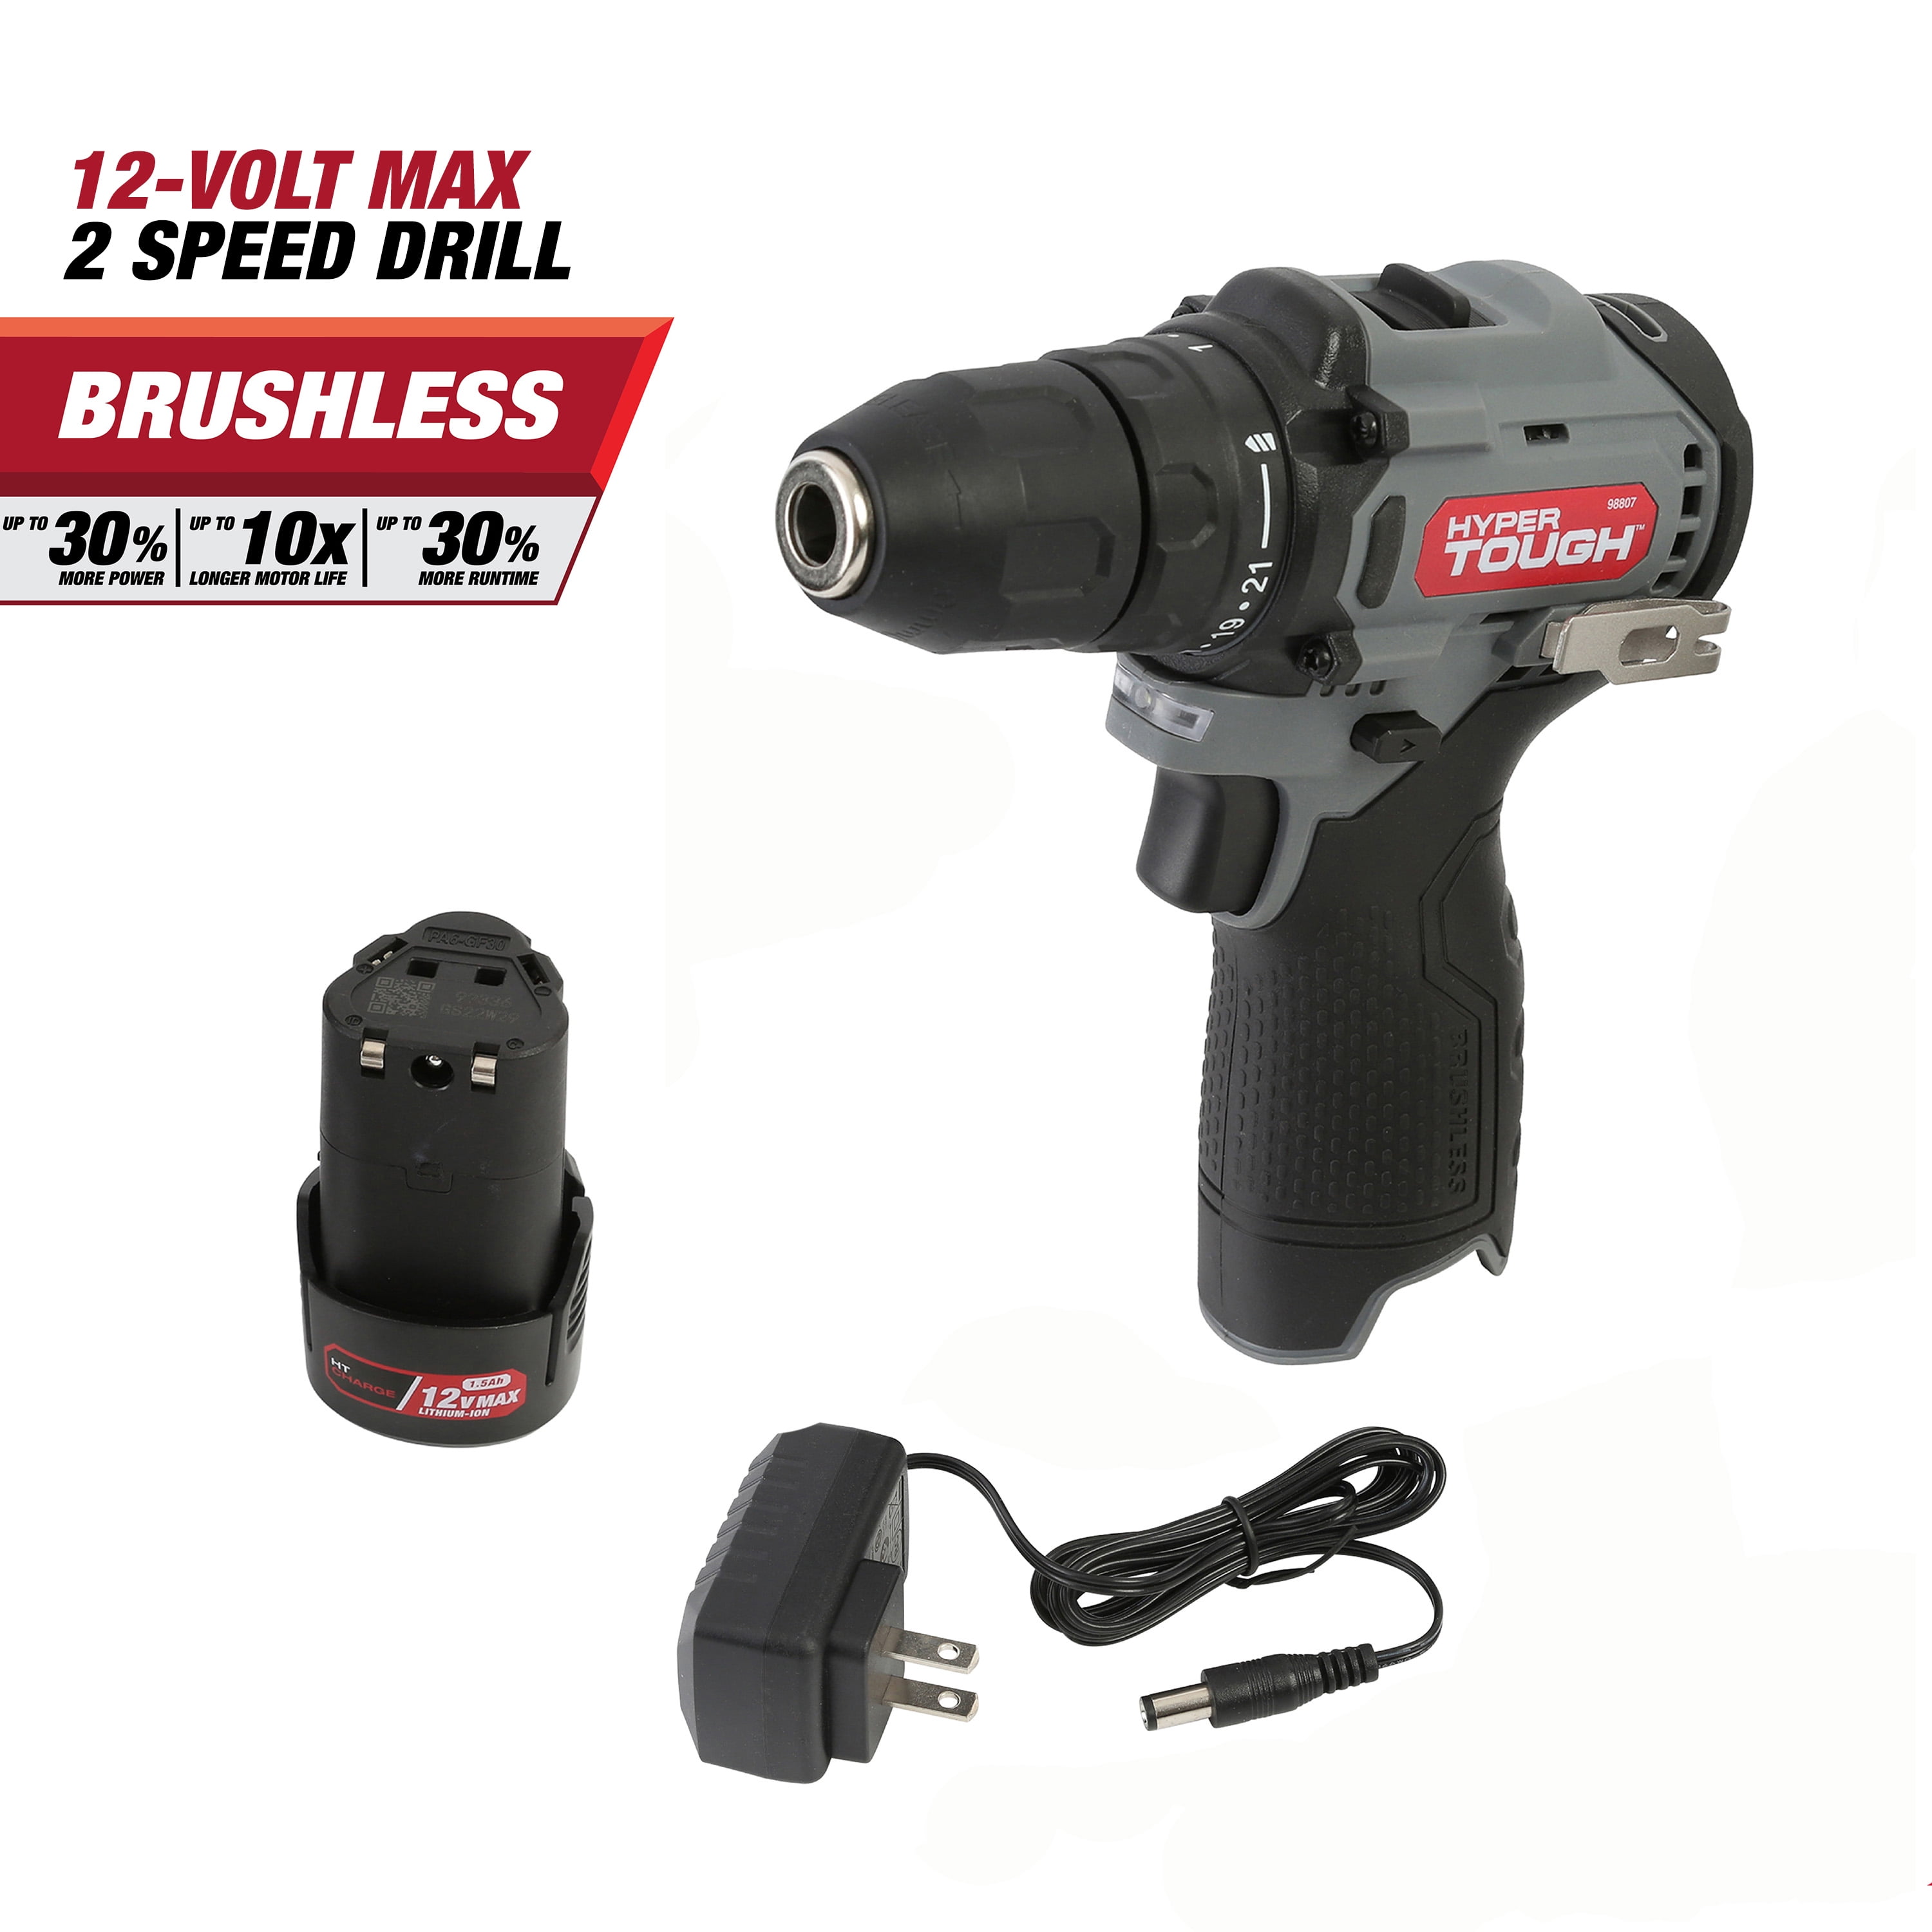 BLACK+DECKER 12-volt Max 3/8-in Keyless Cordless Drill (1-Battery Included, Charger  Included at